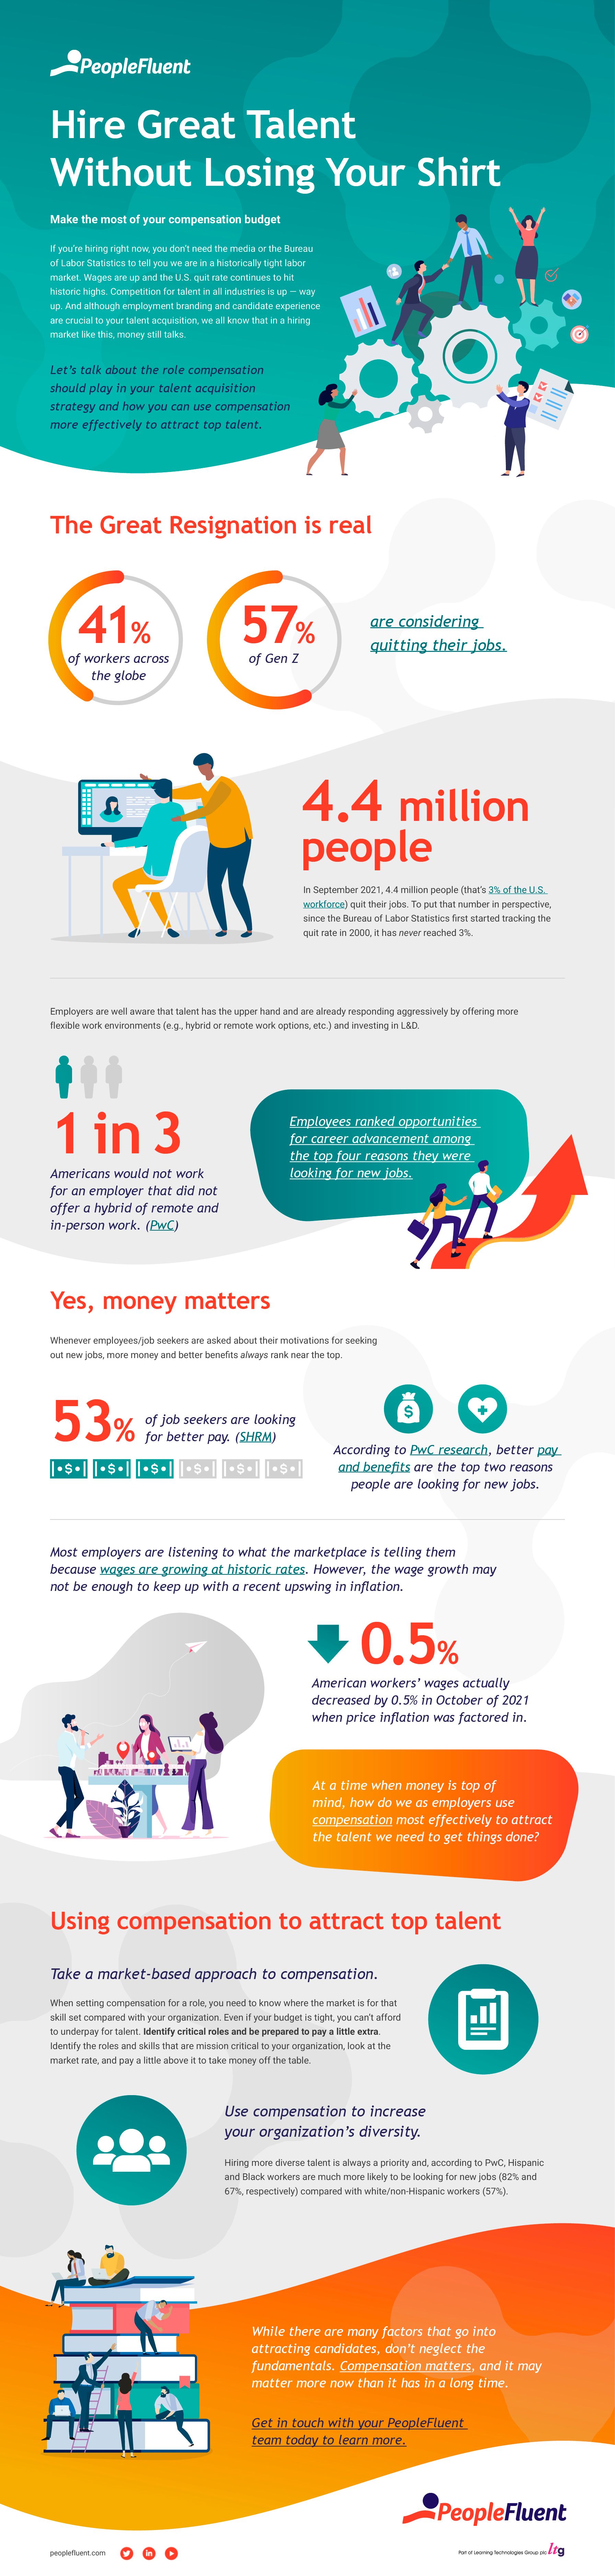 A PeopleFluent infographic about compensation